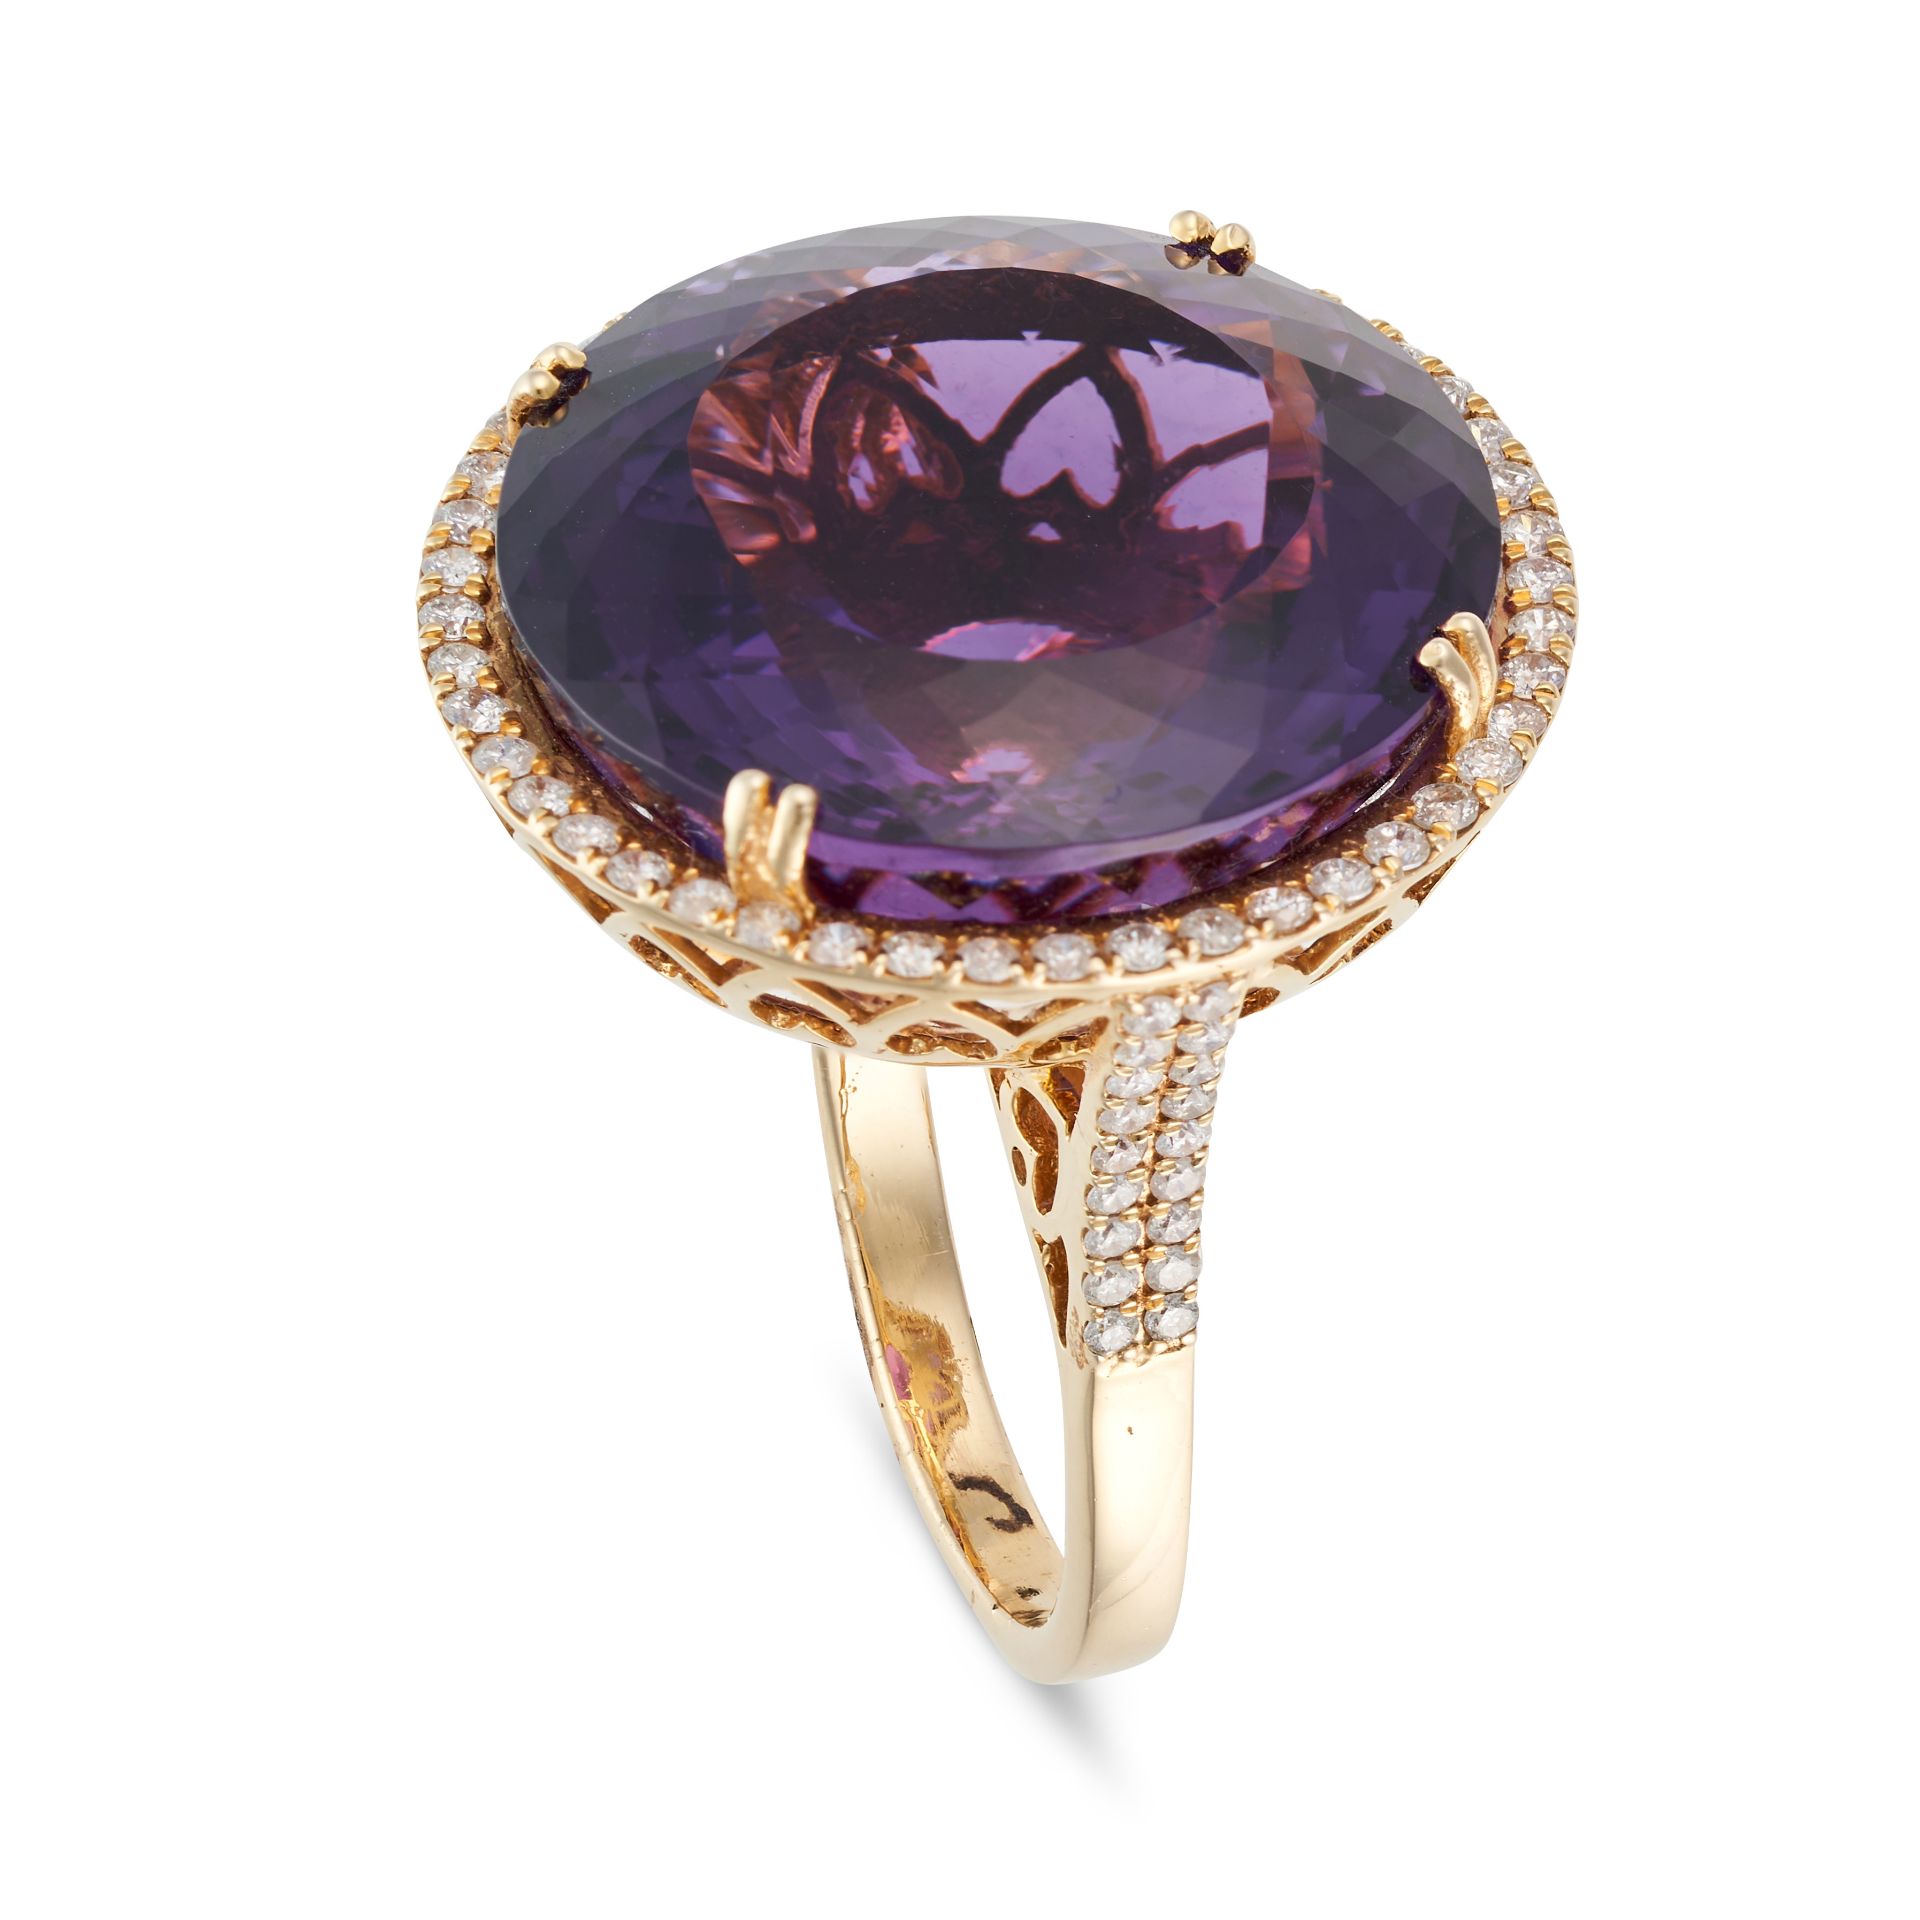 AN AMETHYST AND DIAMOND DRESS RING set with a round cut amethyst of 31.34 carats in a border of r... - Image 2 of 2